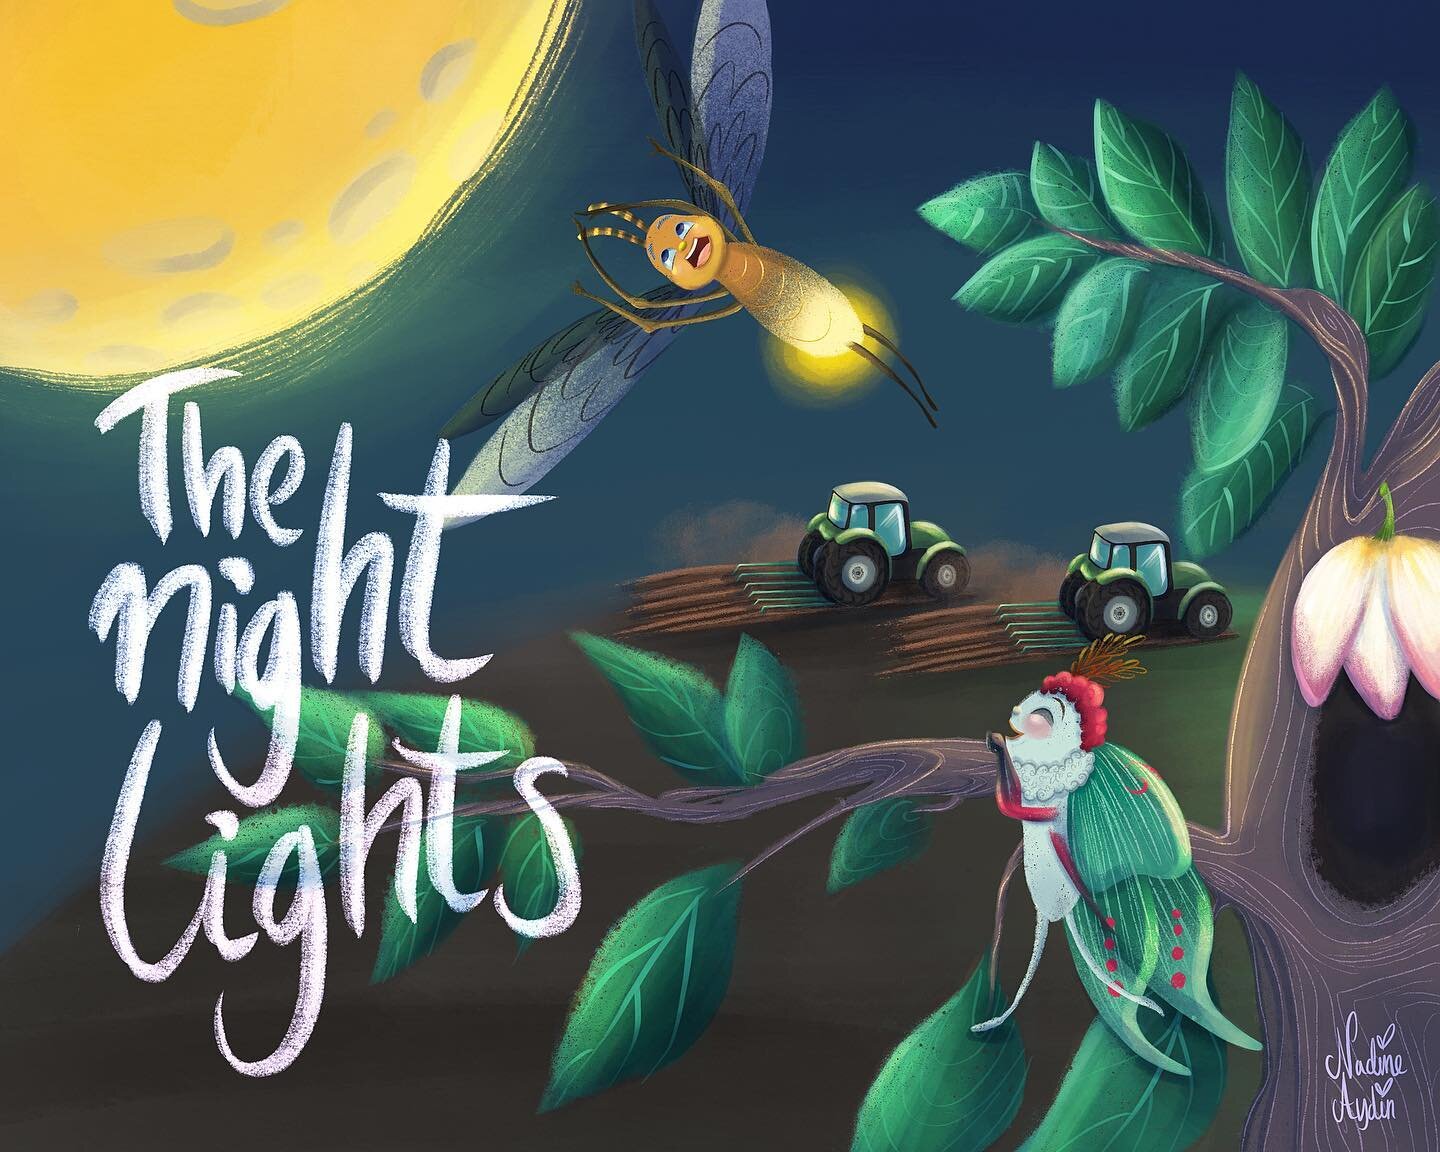 The night lights.
A story about a firefly and a moth trying to find the way back home but the human wold is confusing their senses to get home safely.
🦋 
🪲 
🌝 
🍃 
Swipe through to check my illustrations for this story written by Zoe Tucker.
#make